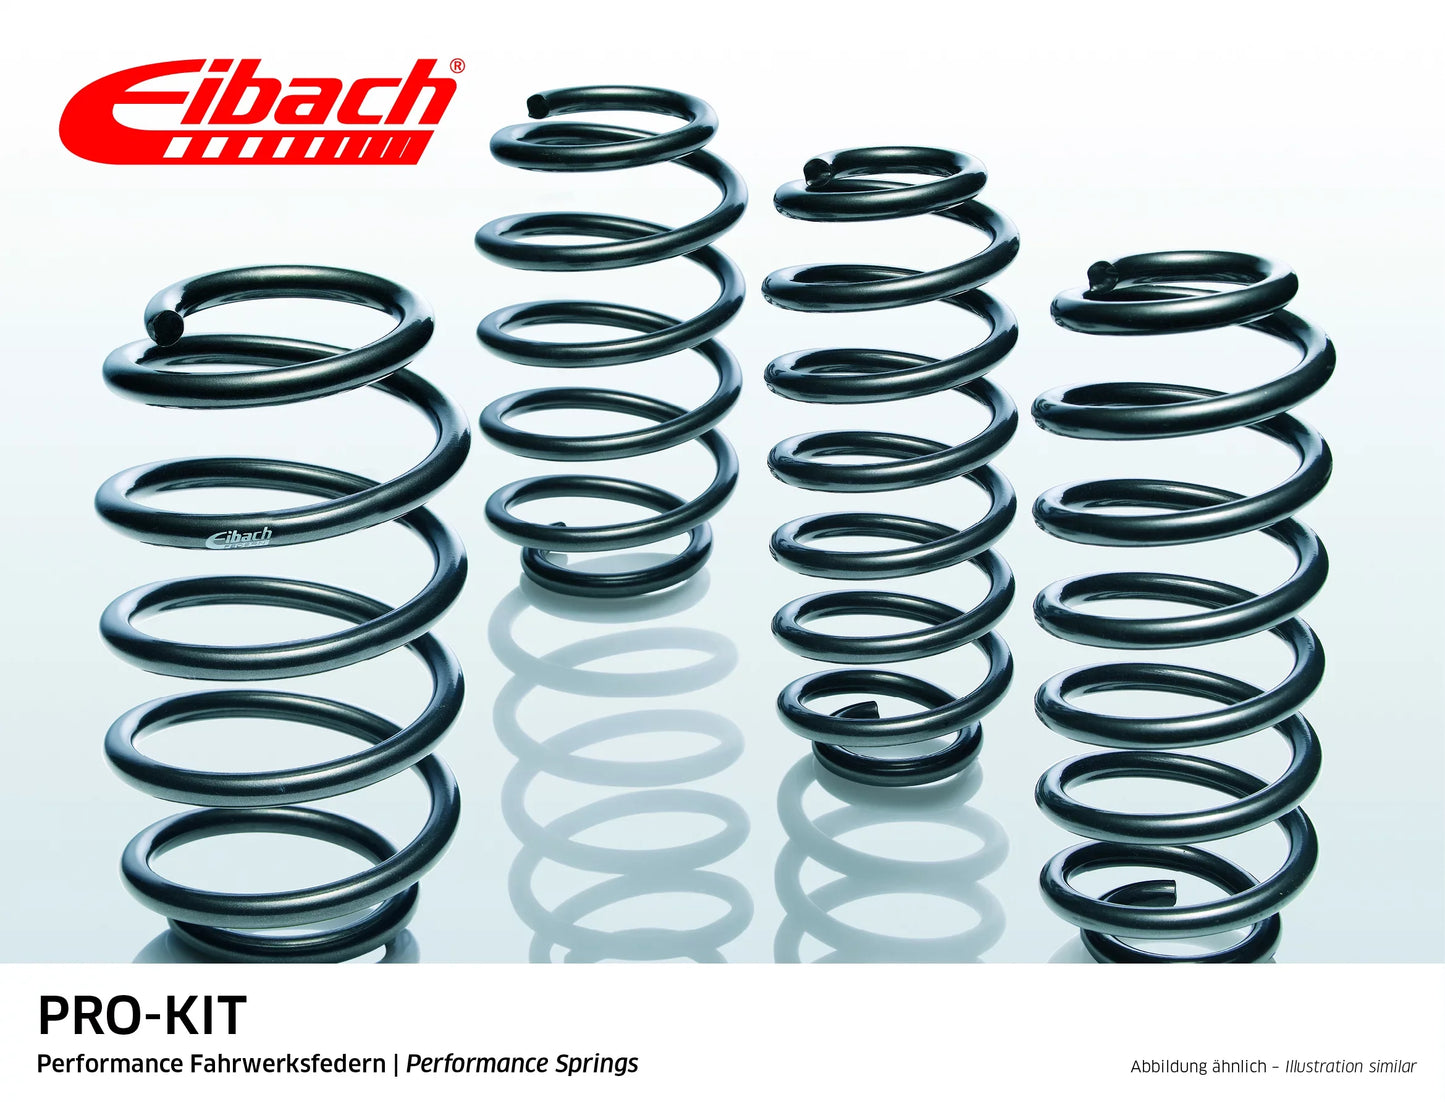 Eibach Pro-Kit Lowering Springs (E10-55-004-03-22) at £239.59